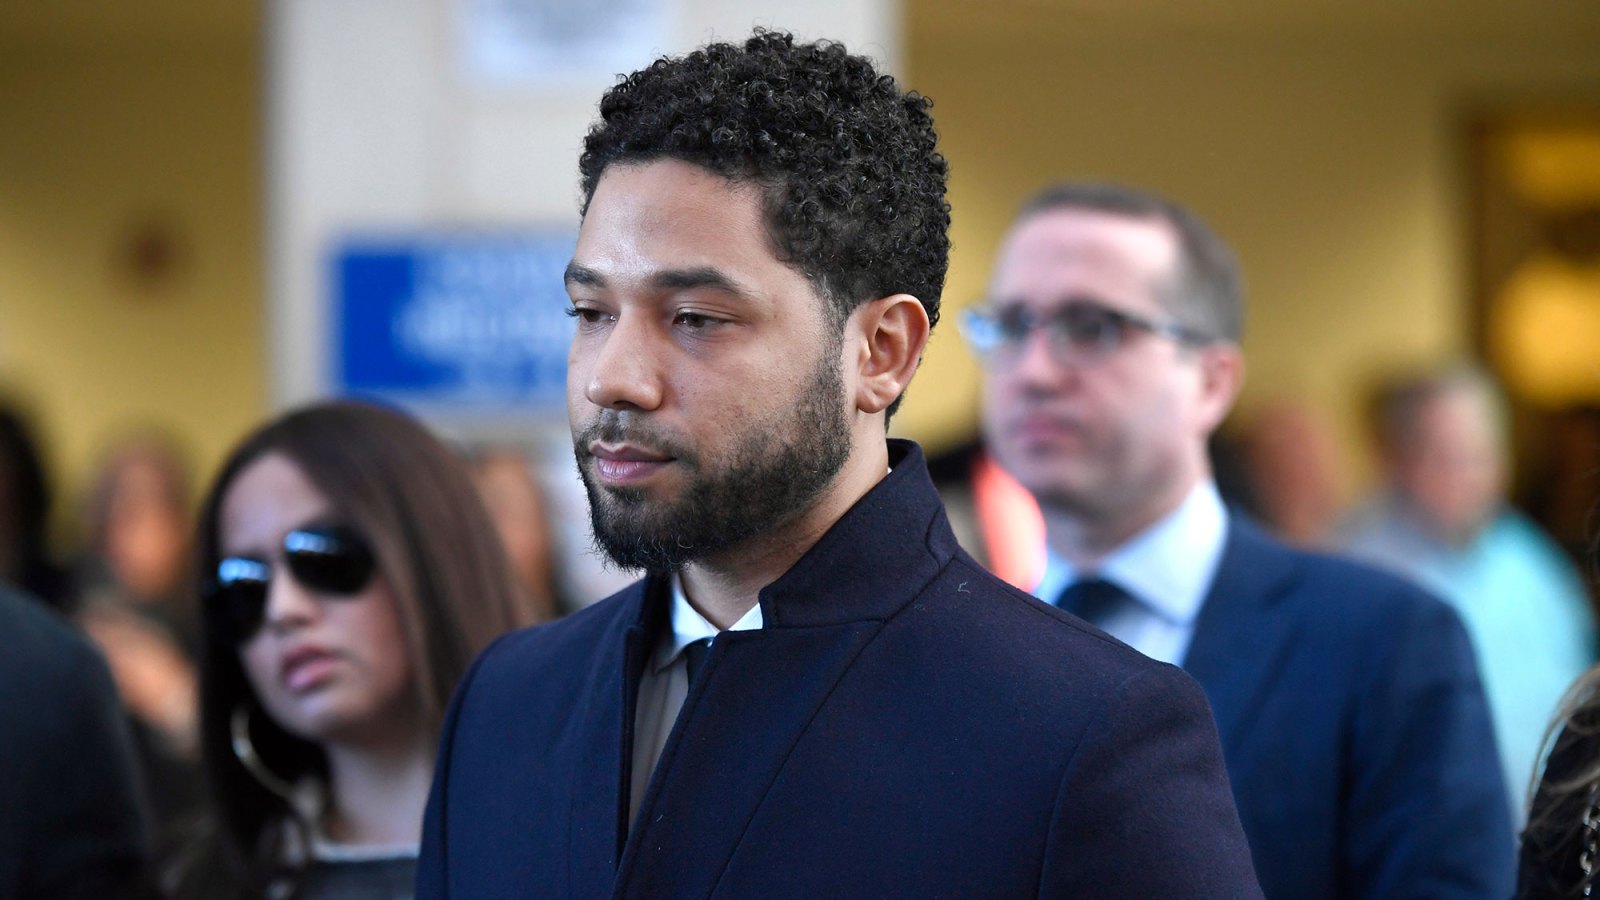 Jussie Smollett Found Guilty/Not Guilty in Trial After Alleged Attack